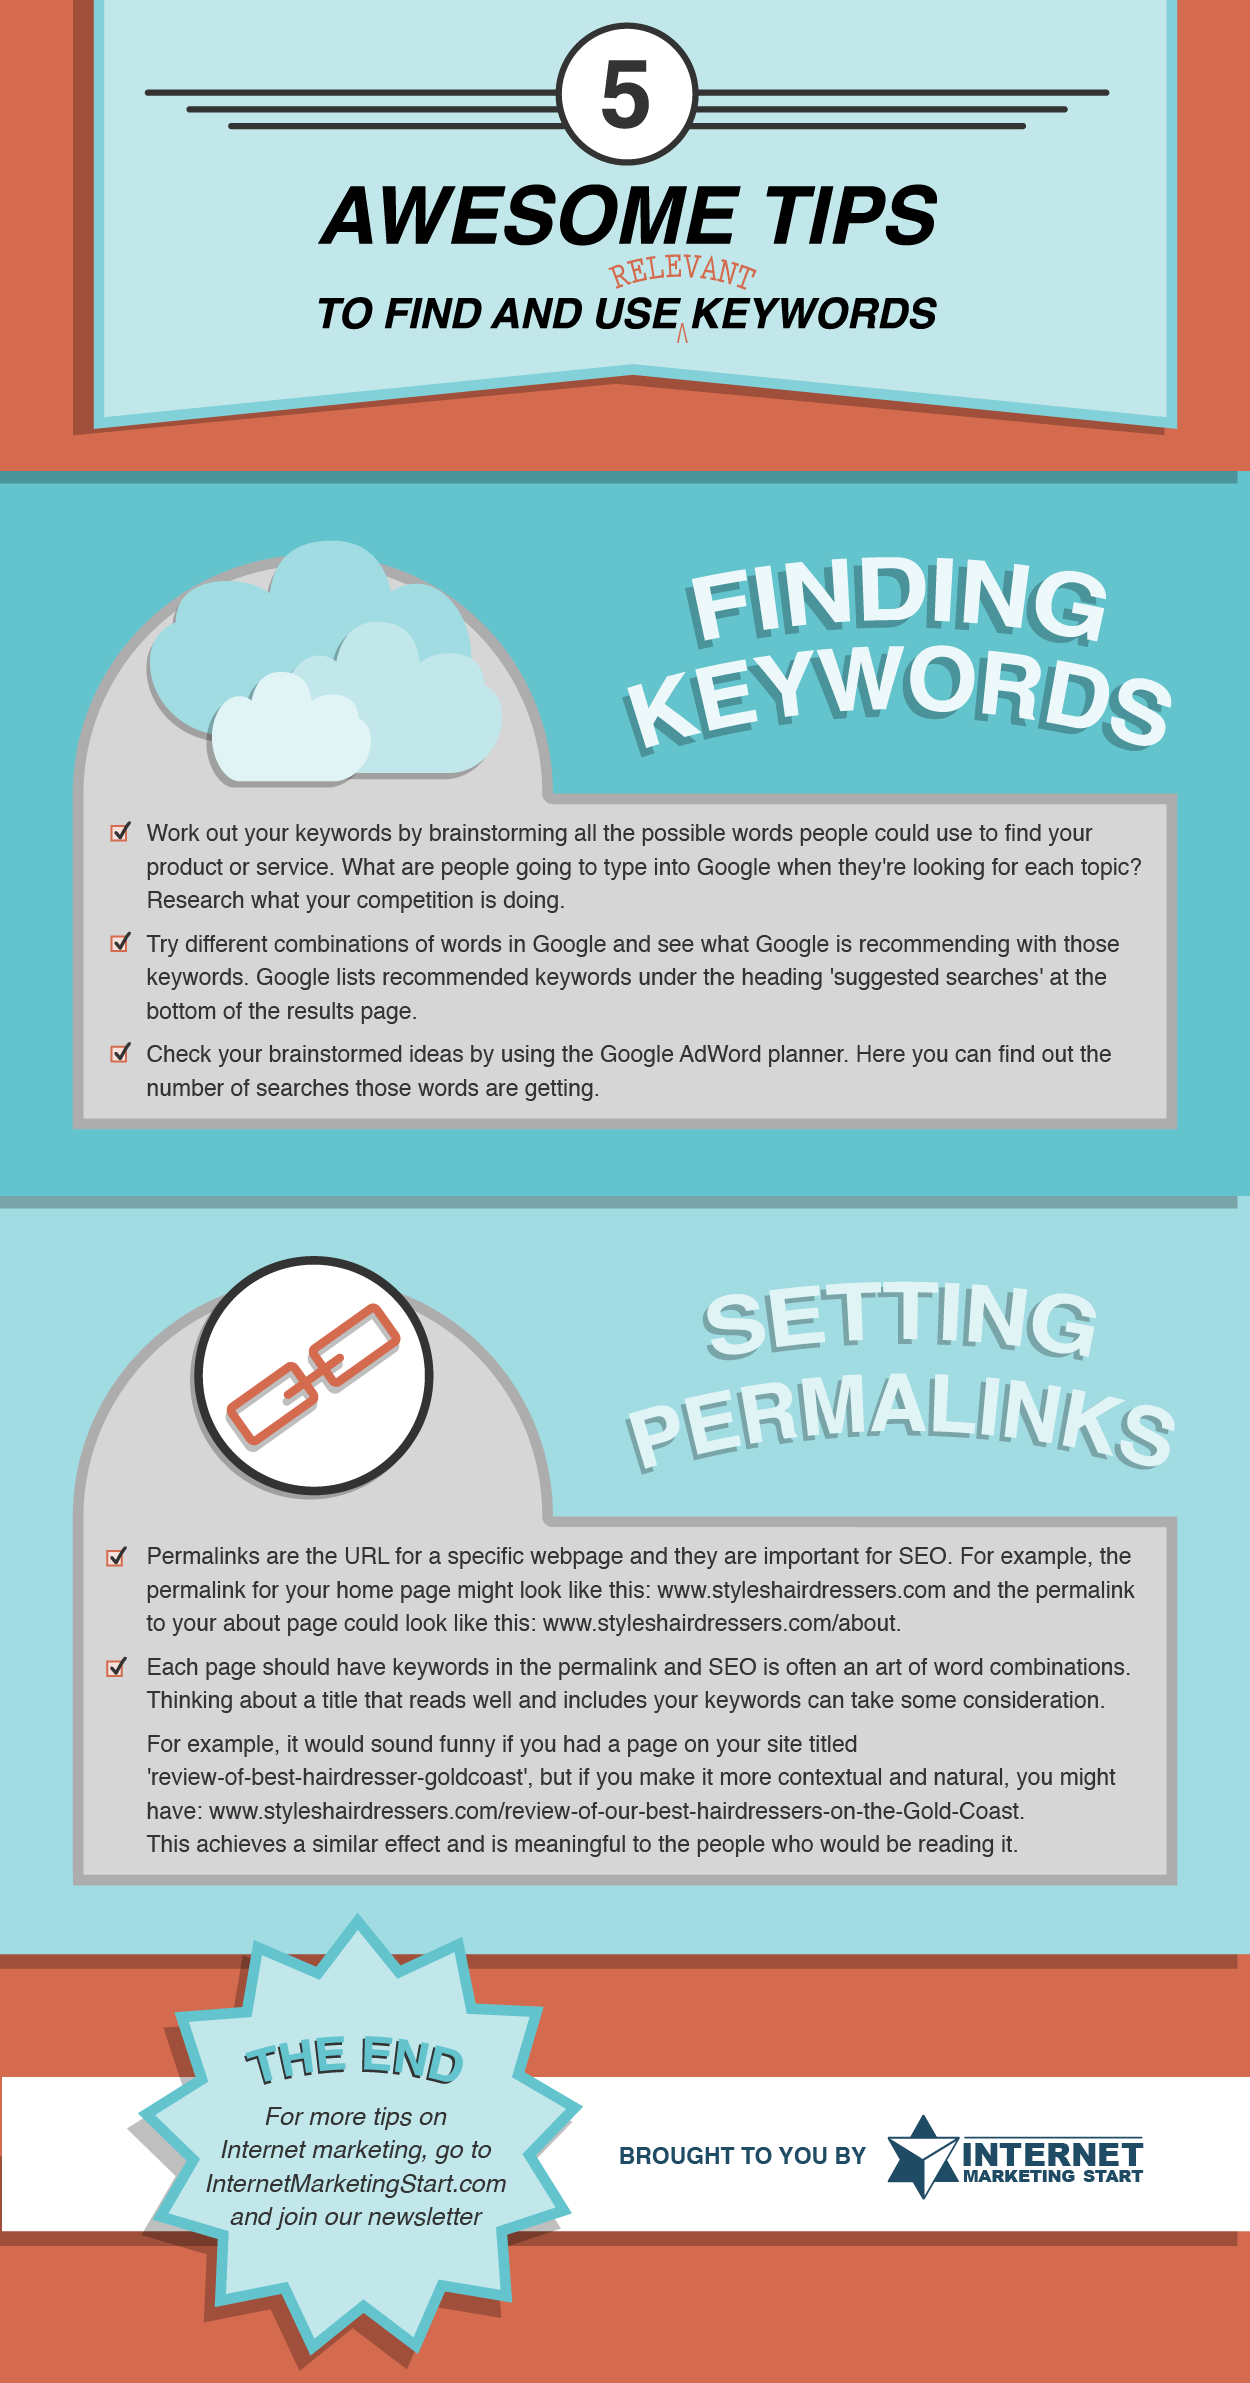 Tips for how to find relevant keywords and research tools to rank your website online in Google with SEO techniques